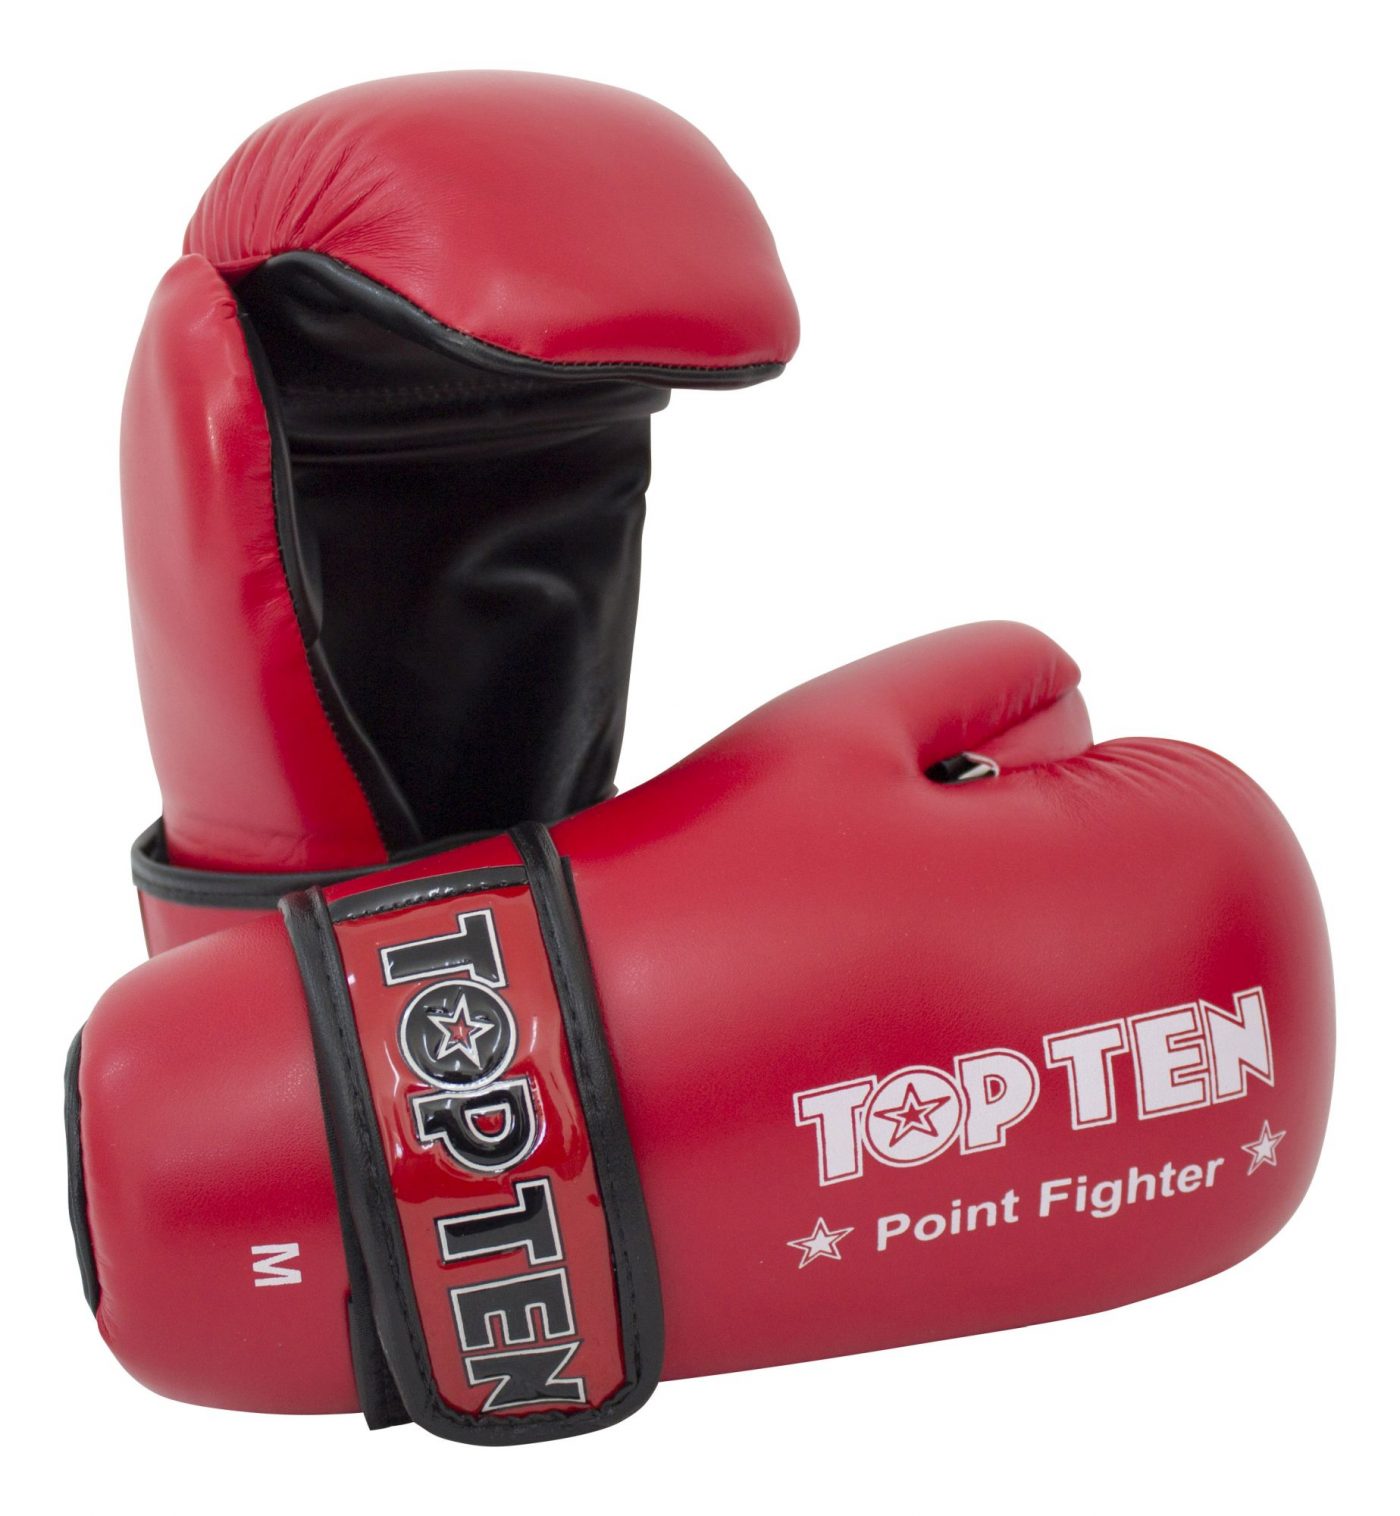 TOP TEN Pointfighter “Point Fighter” Rood